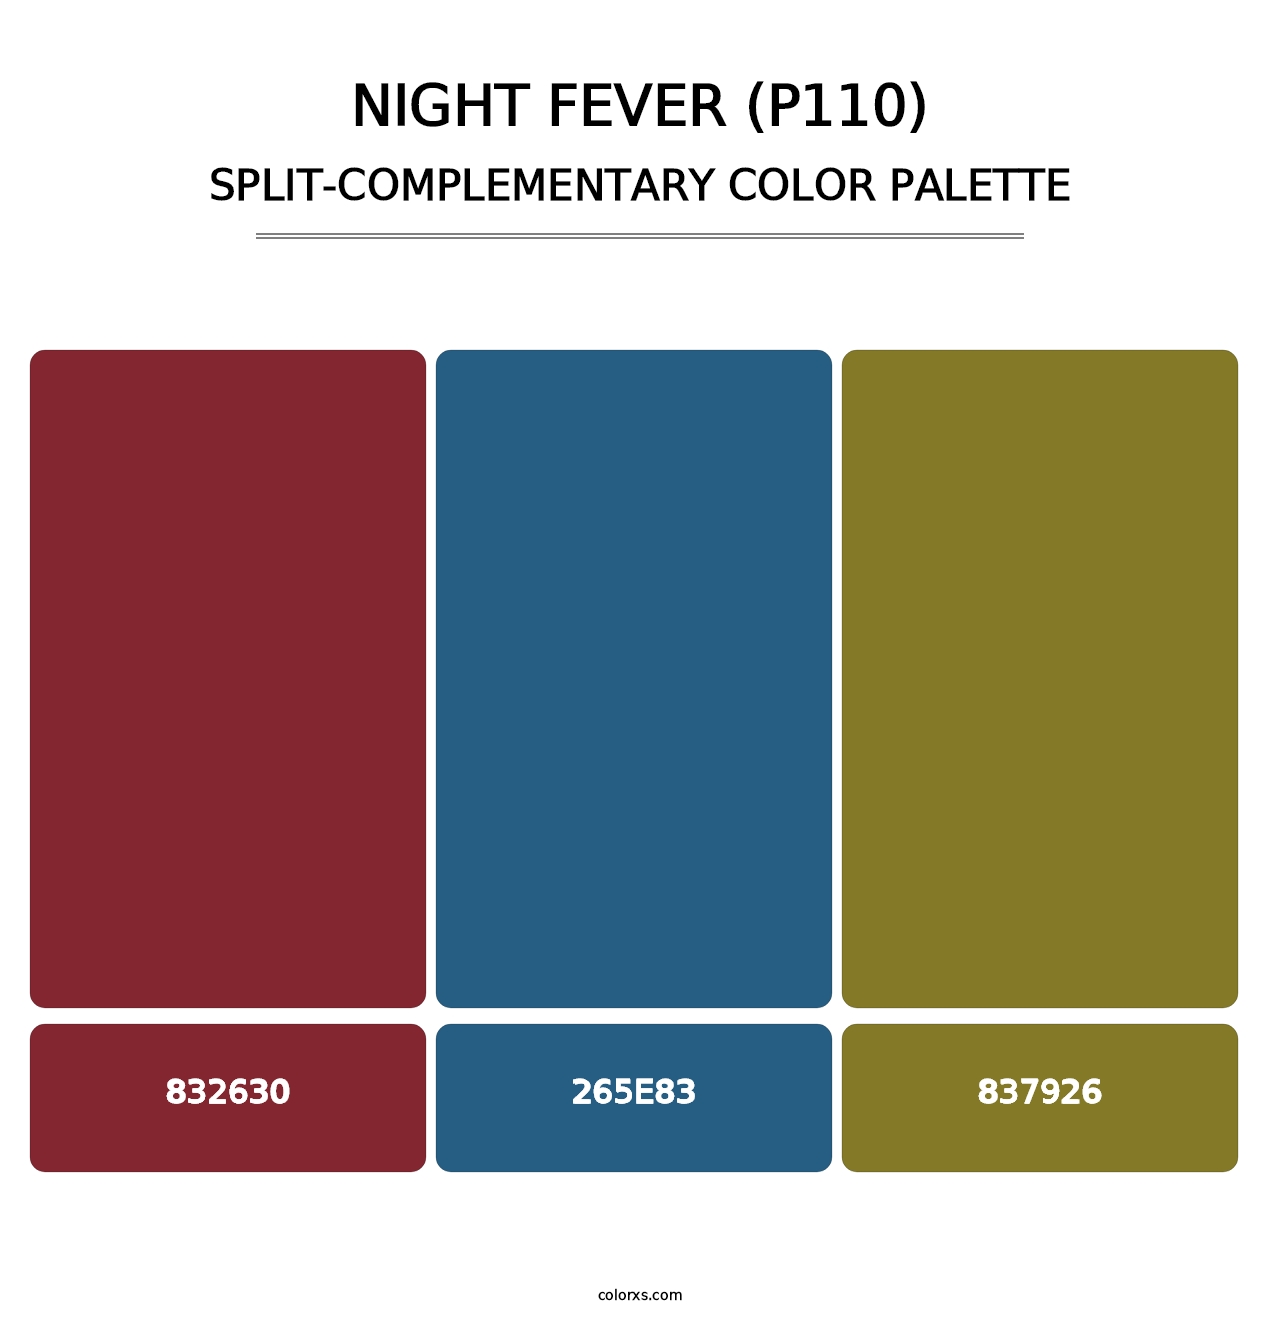 Night Fever (P110) - Split-Complementary Color Palette